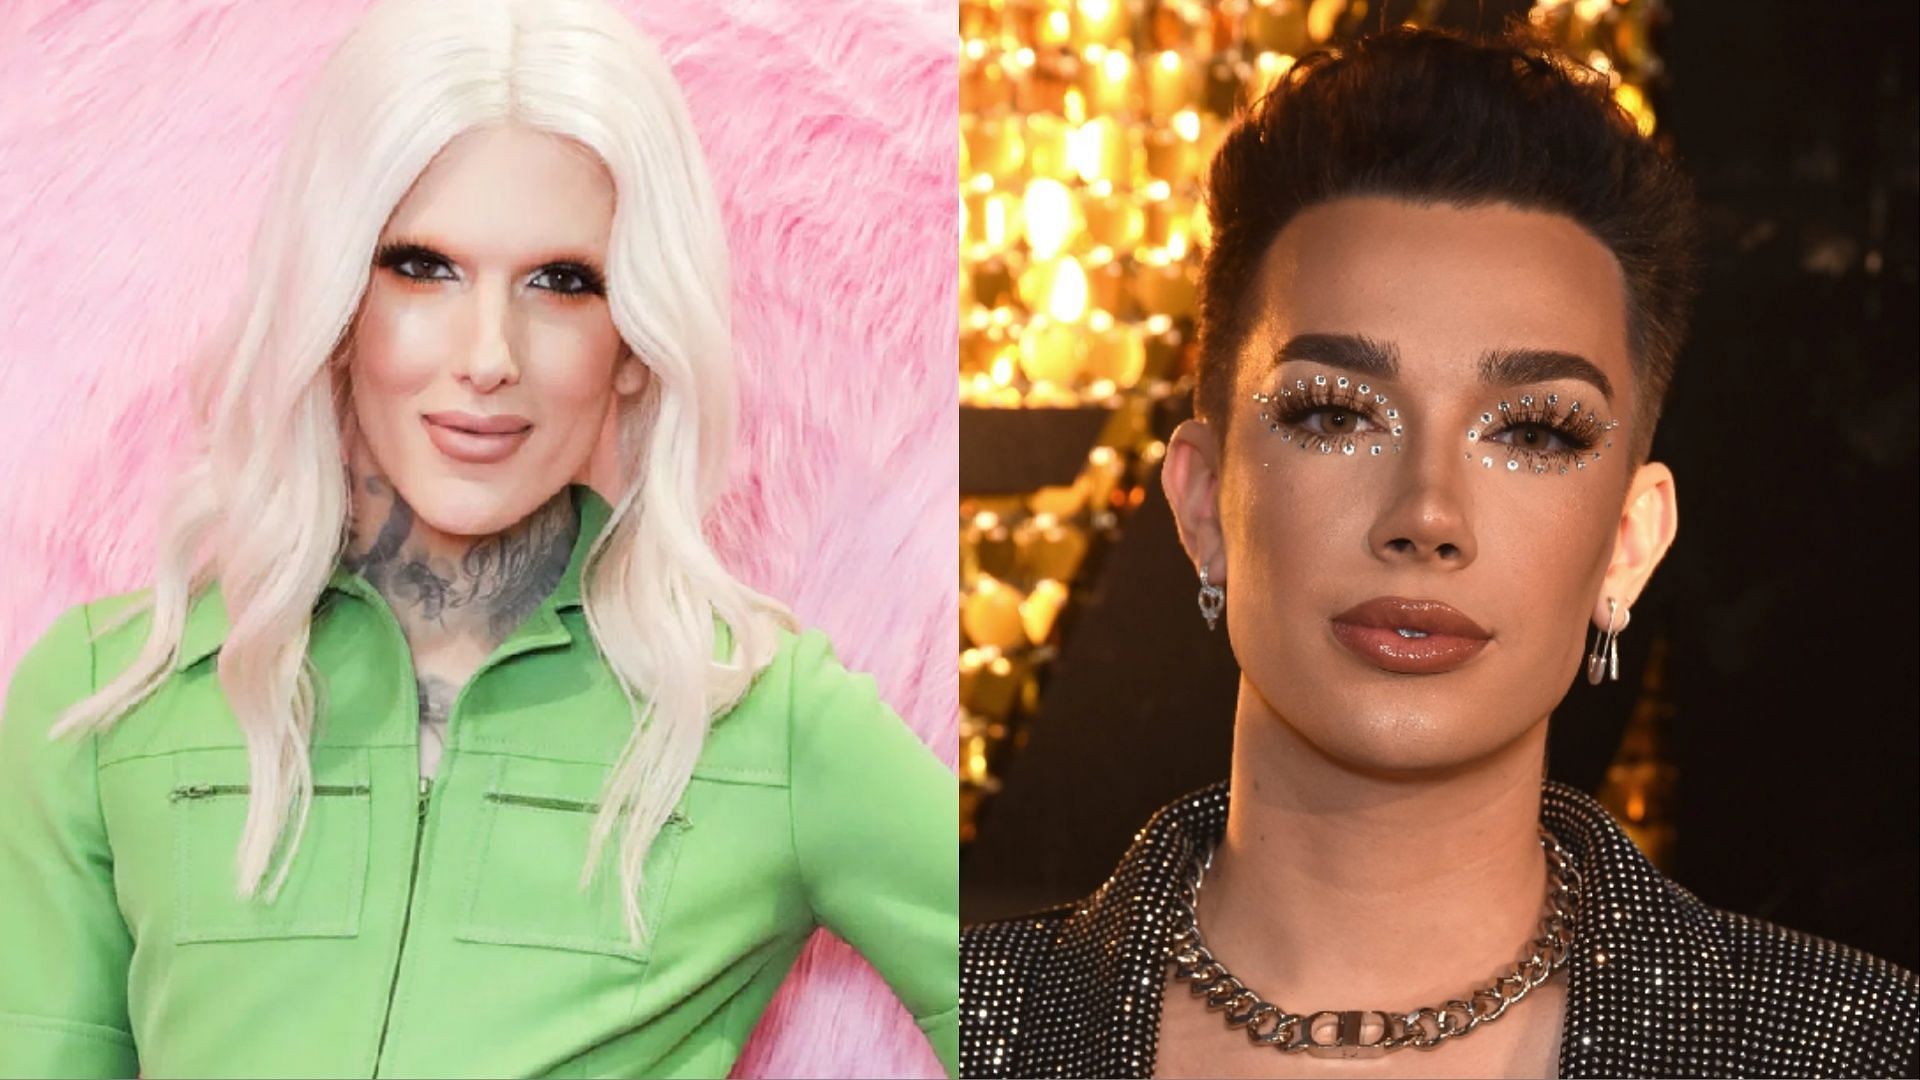 Jeffree Star and James Charles. (Photos via Getty Images)